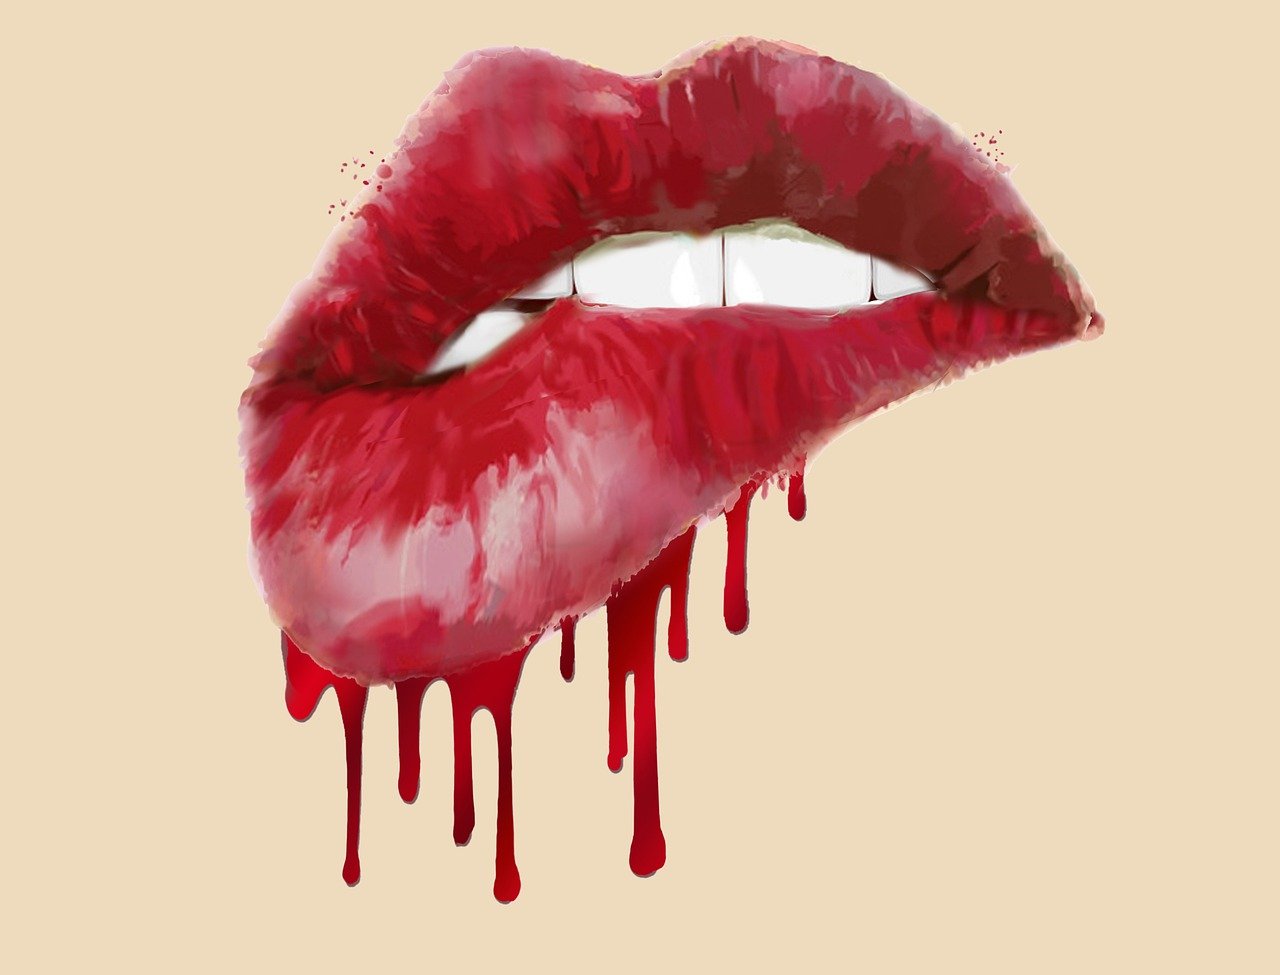 a red lip with blood dripping down it, vector art, by Relja Penezic, digital art - w 640, oil paint style, licking out, mix of aesthetics